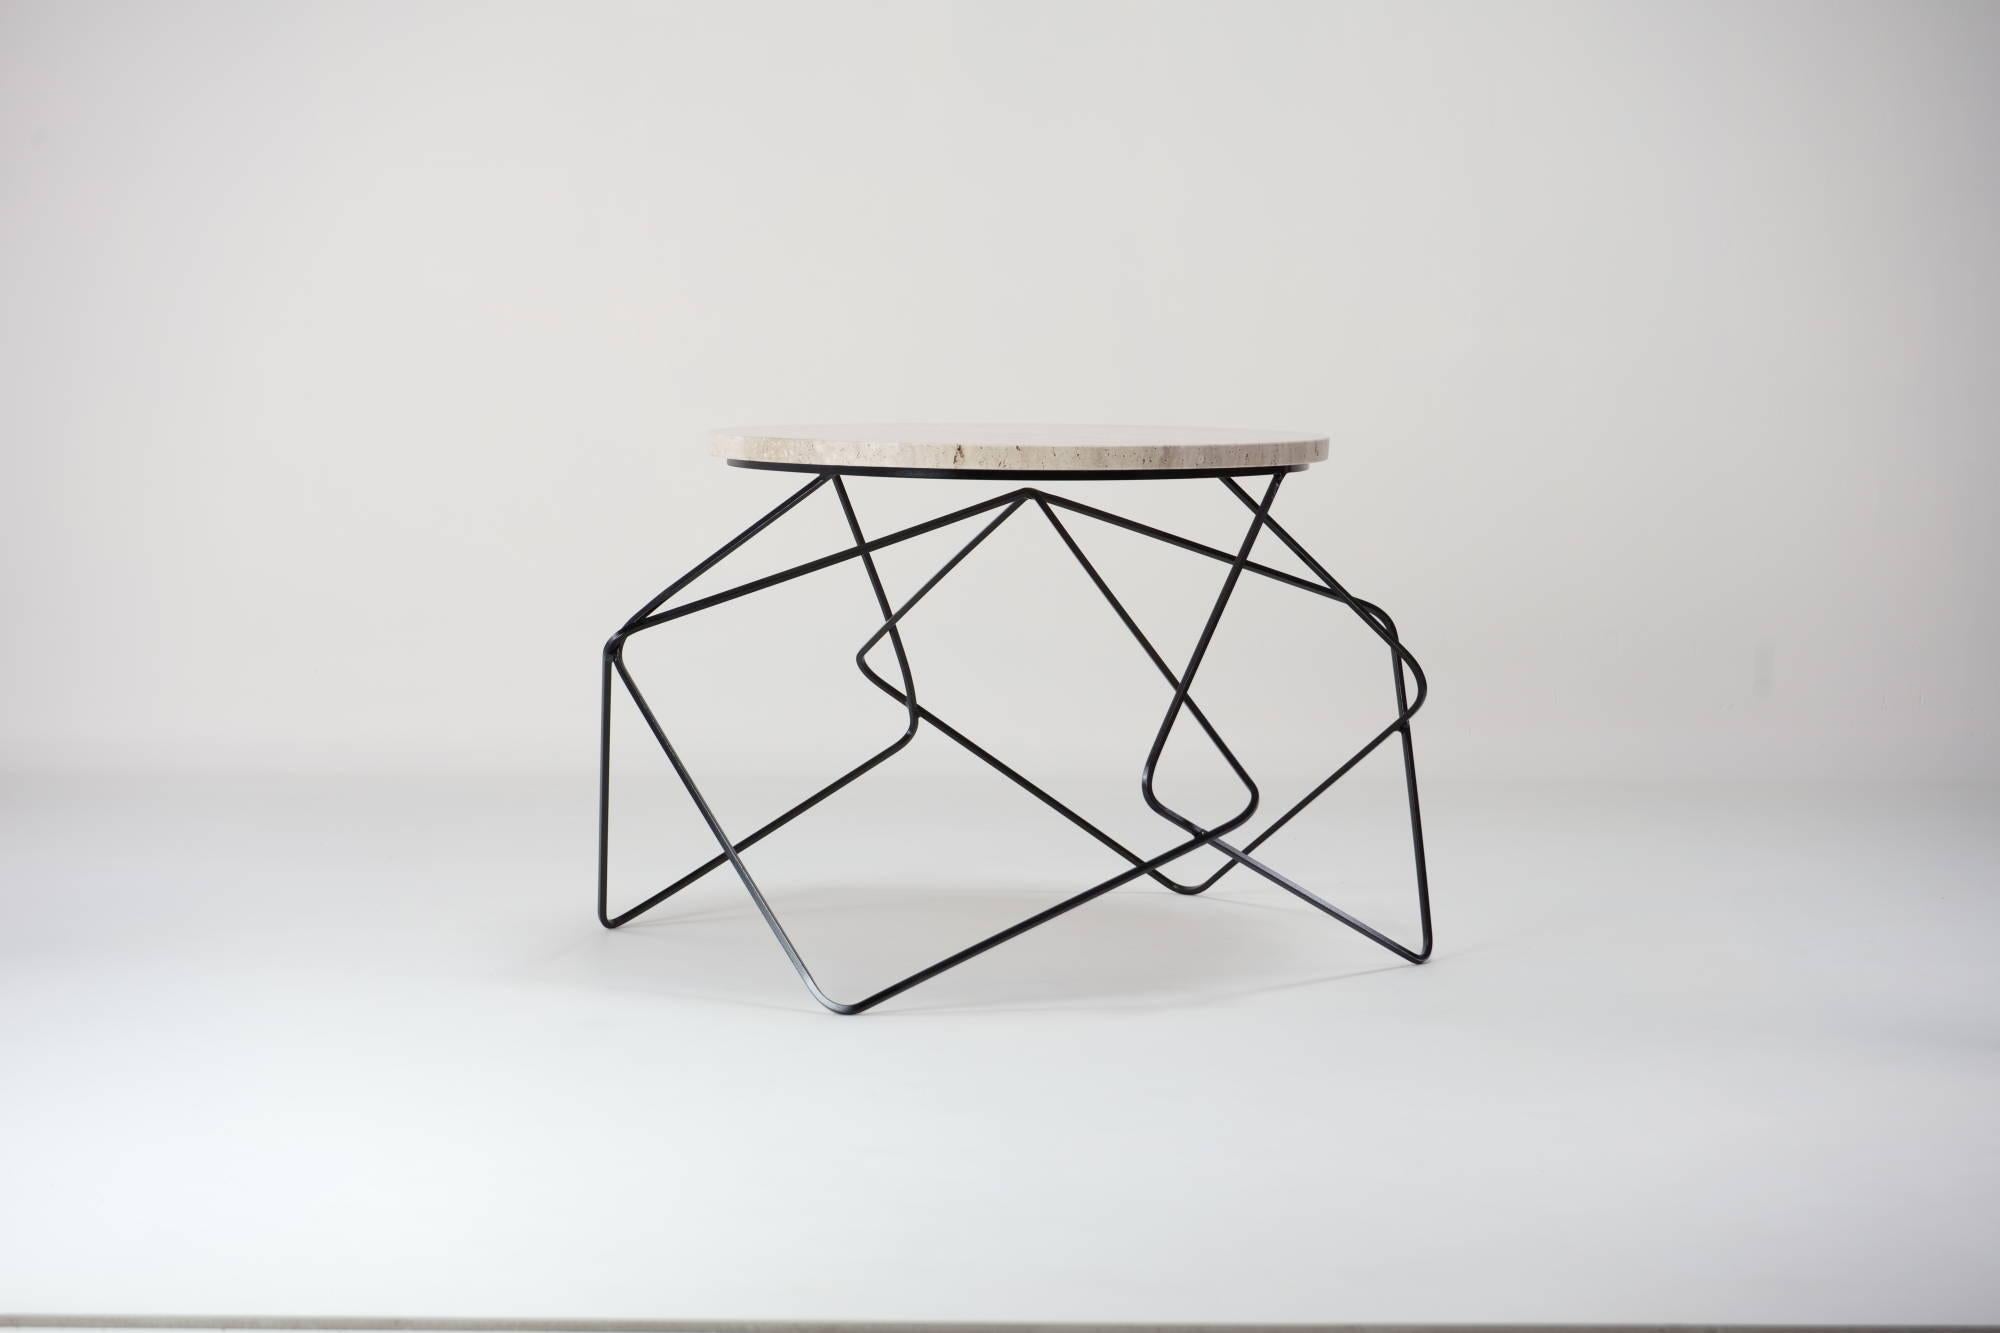 Stable, Travertine Coffee Table By DFdesignlab Handmade in Italy In New Condition For Sale In Campobasso, CB